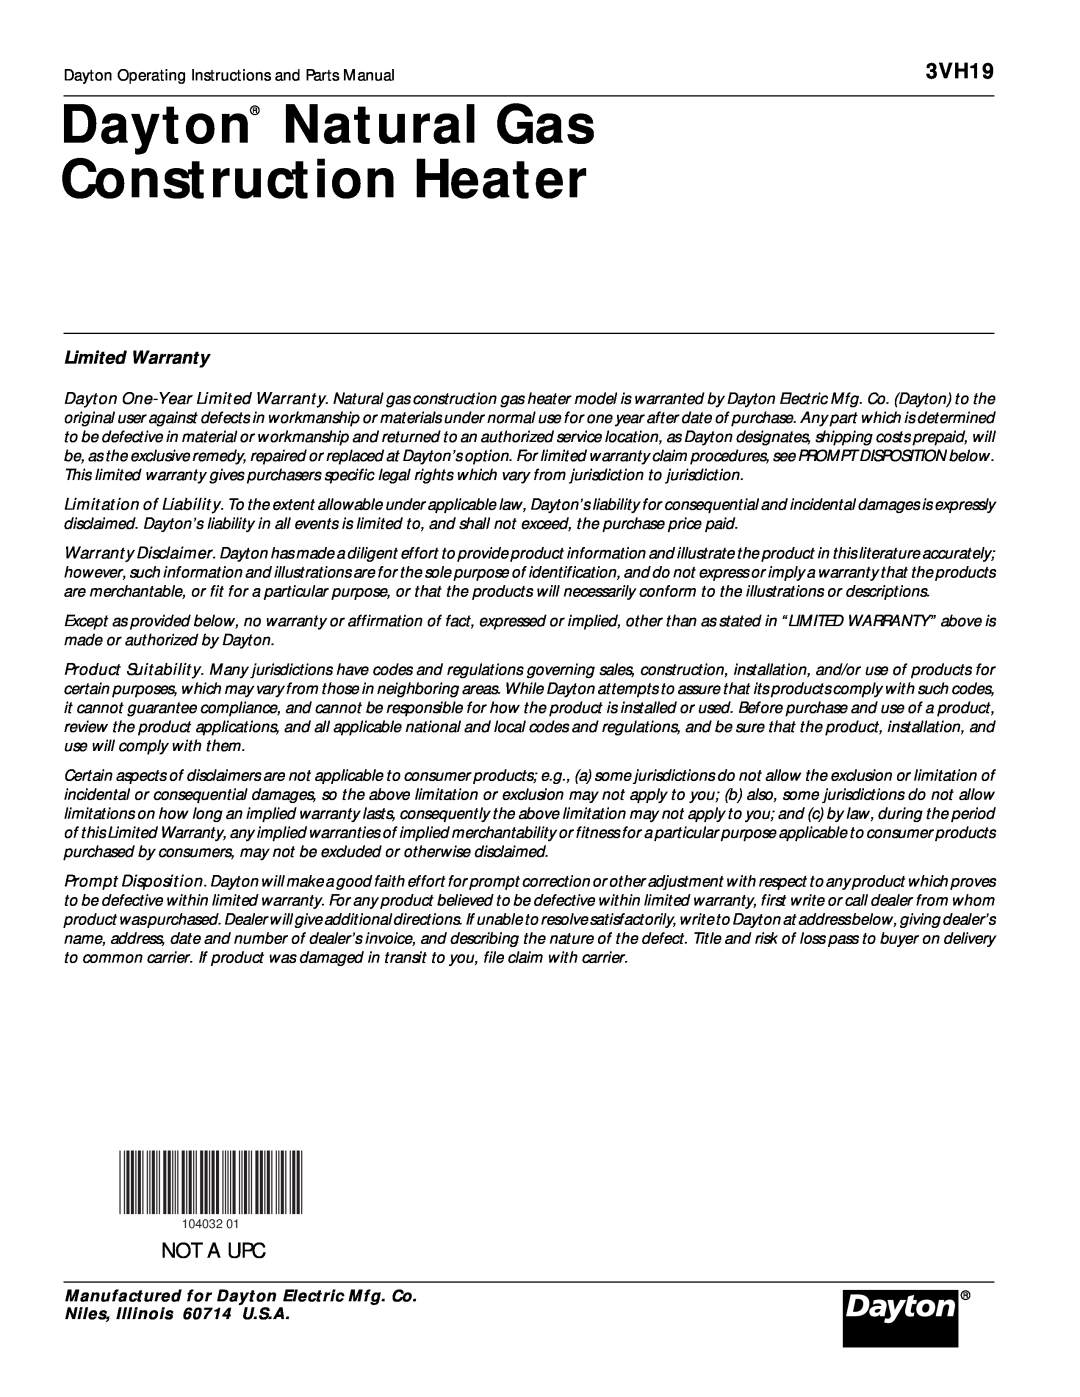 Dayton 3VH19 Dayton Natural Gas Construction Heater, Not A Upc, Limited Warranty, Manufactured for Dayton Electric Mfg. Co 